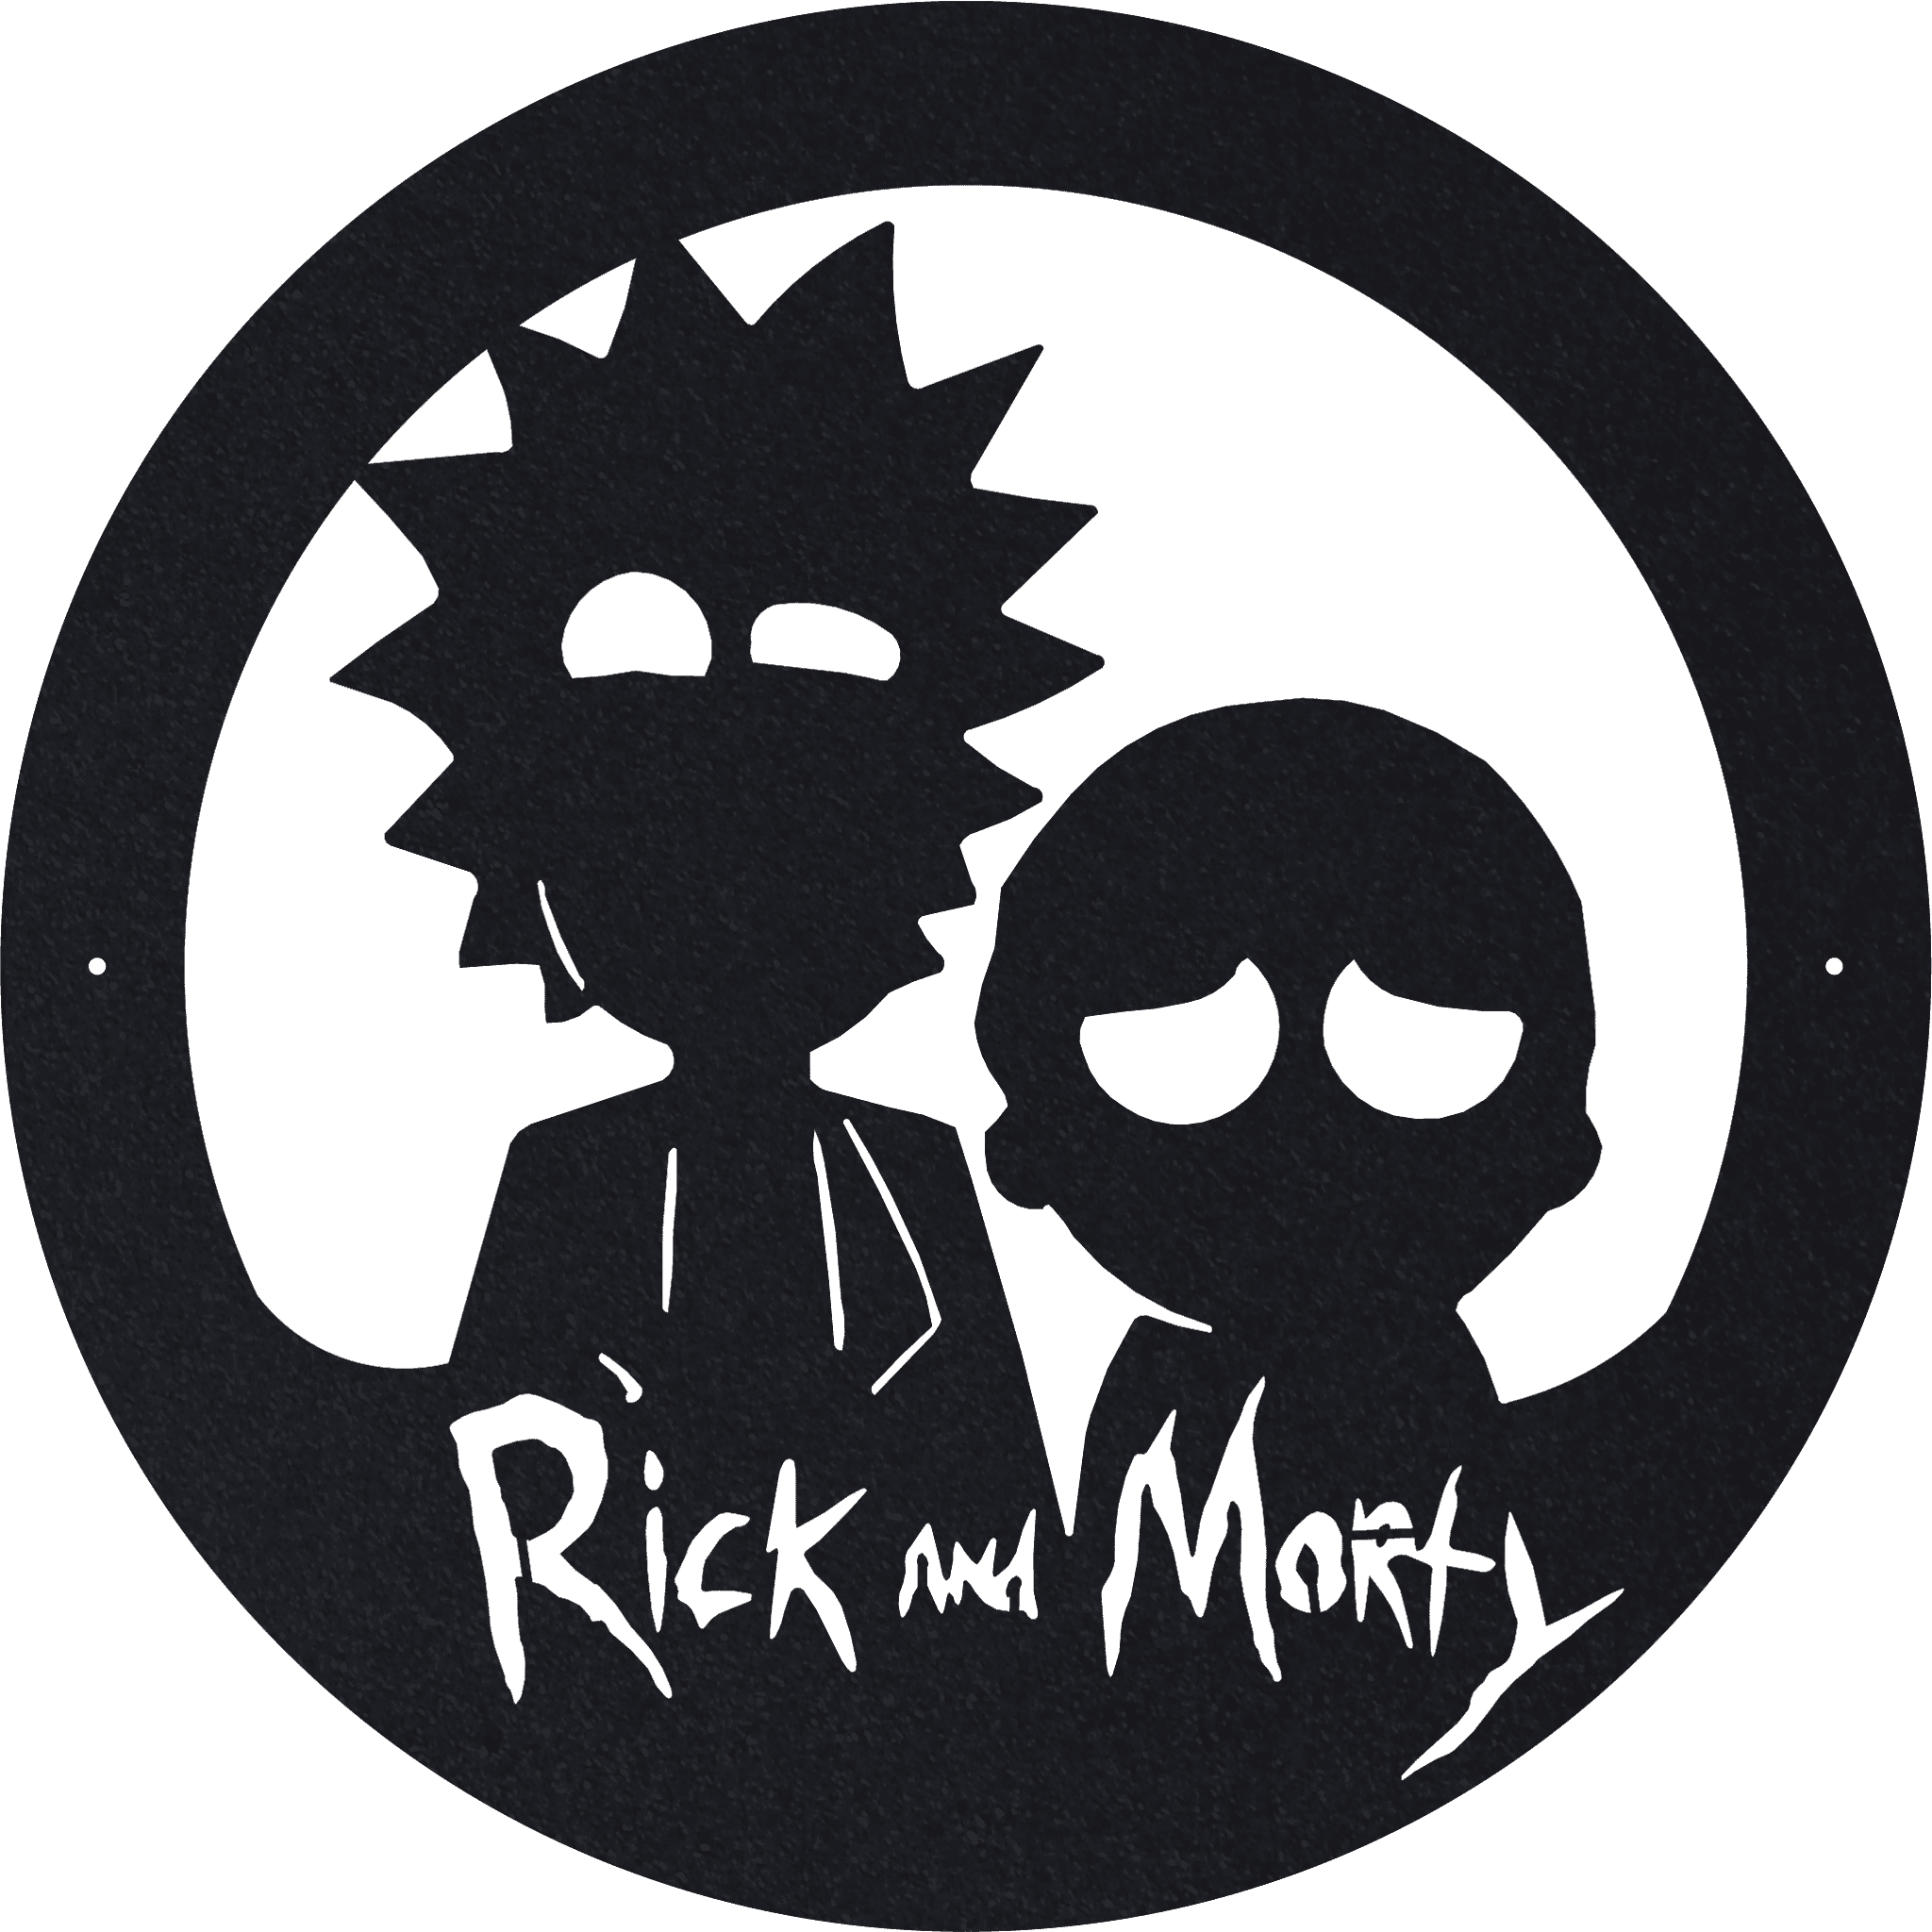 Rick And Morty Logo PNG Images, Transparent Rick And Morty Logo Image  Download - PNGitem